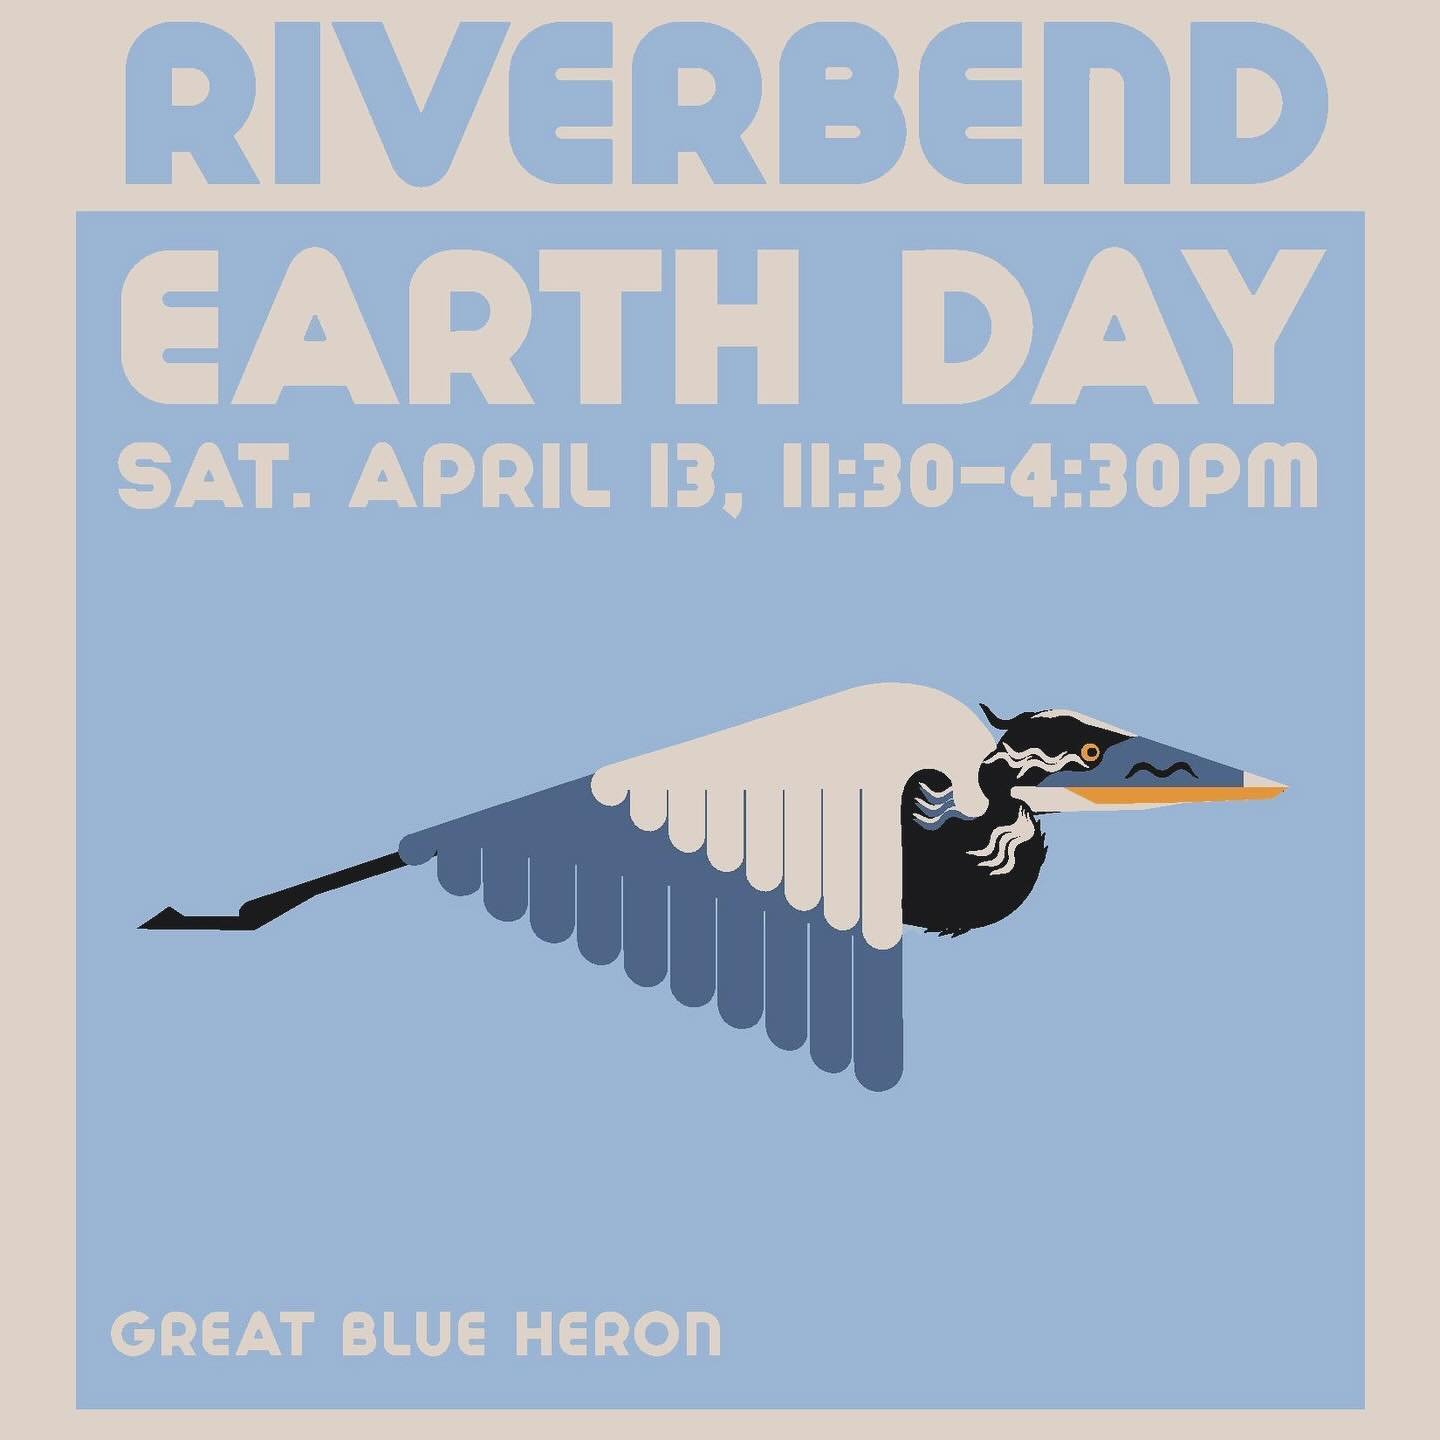 What a beautiful day for RiverBend Earth Day Festival!  Join us from 11:30 - 4:30 TODAY for live music, environmental education, eco-friendly art, native plants, veggie starters, food, drink, shirts, oh my!